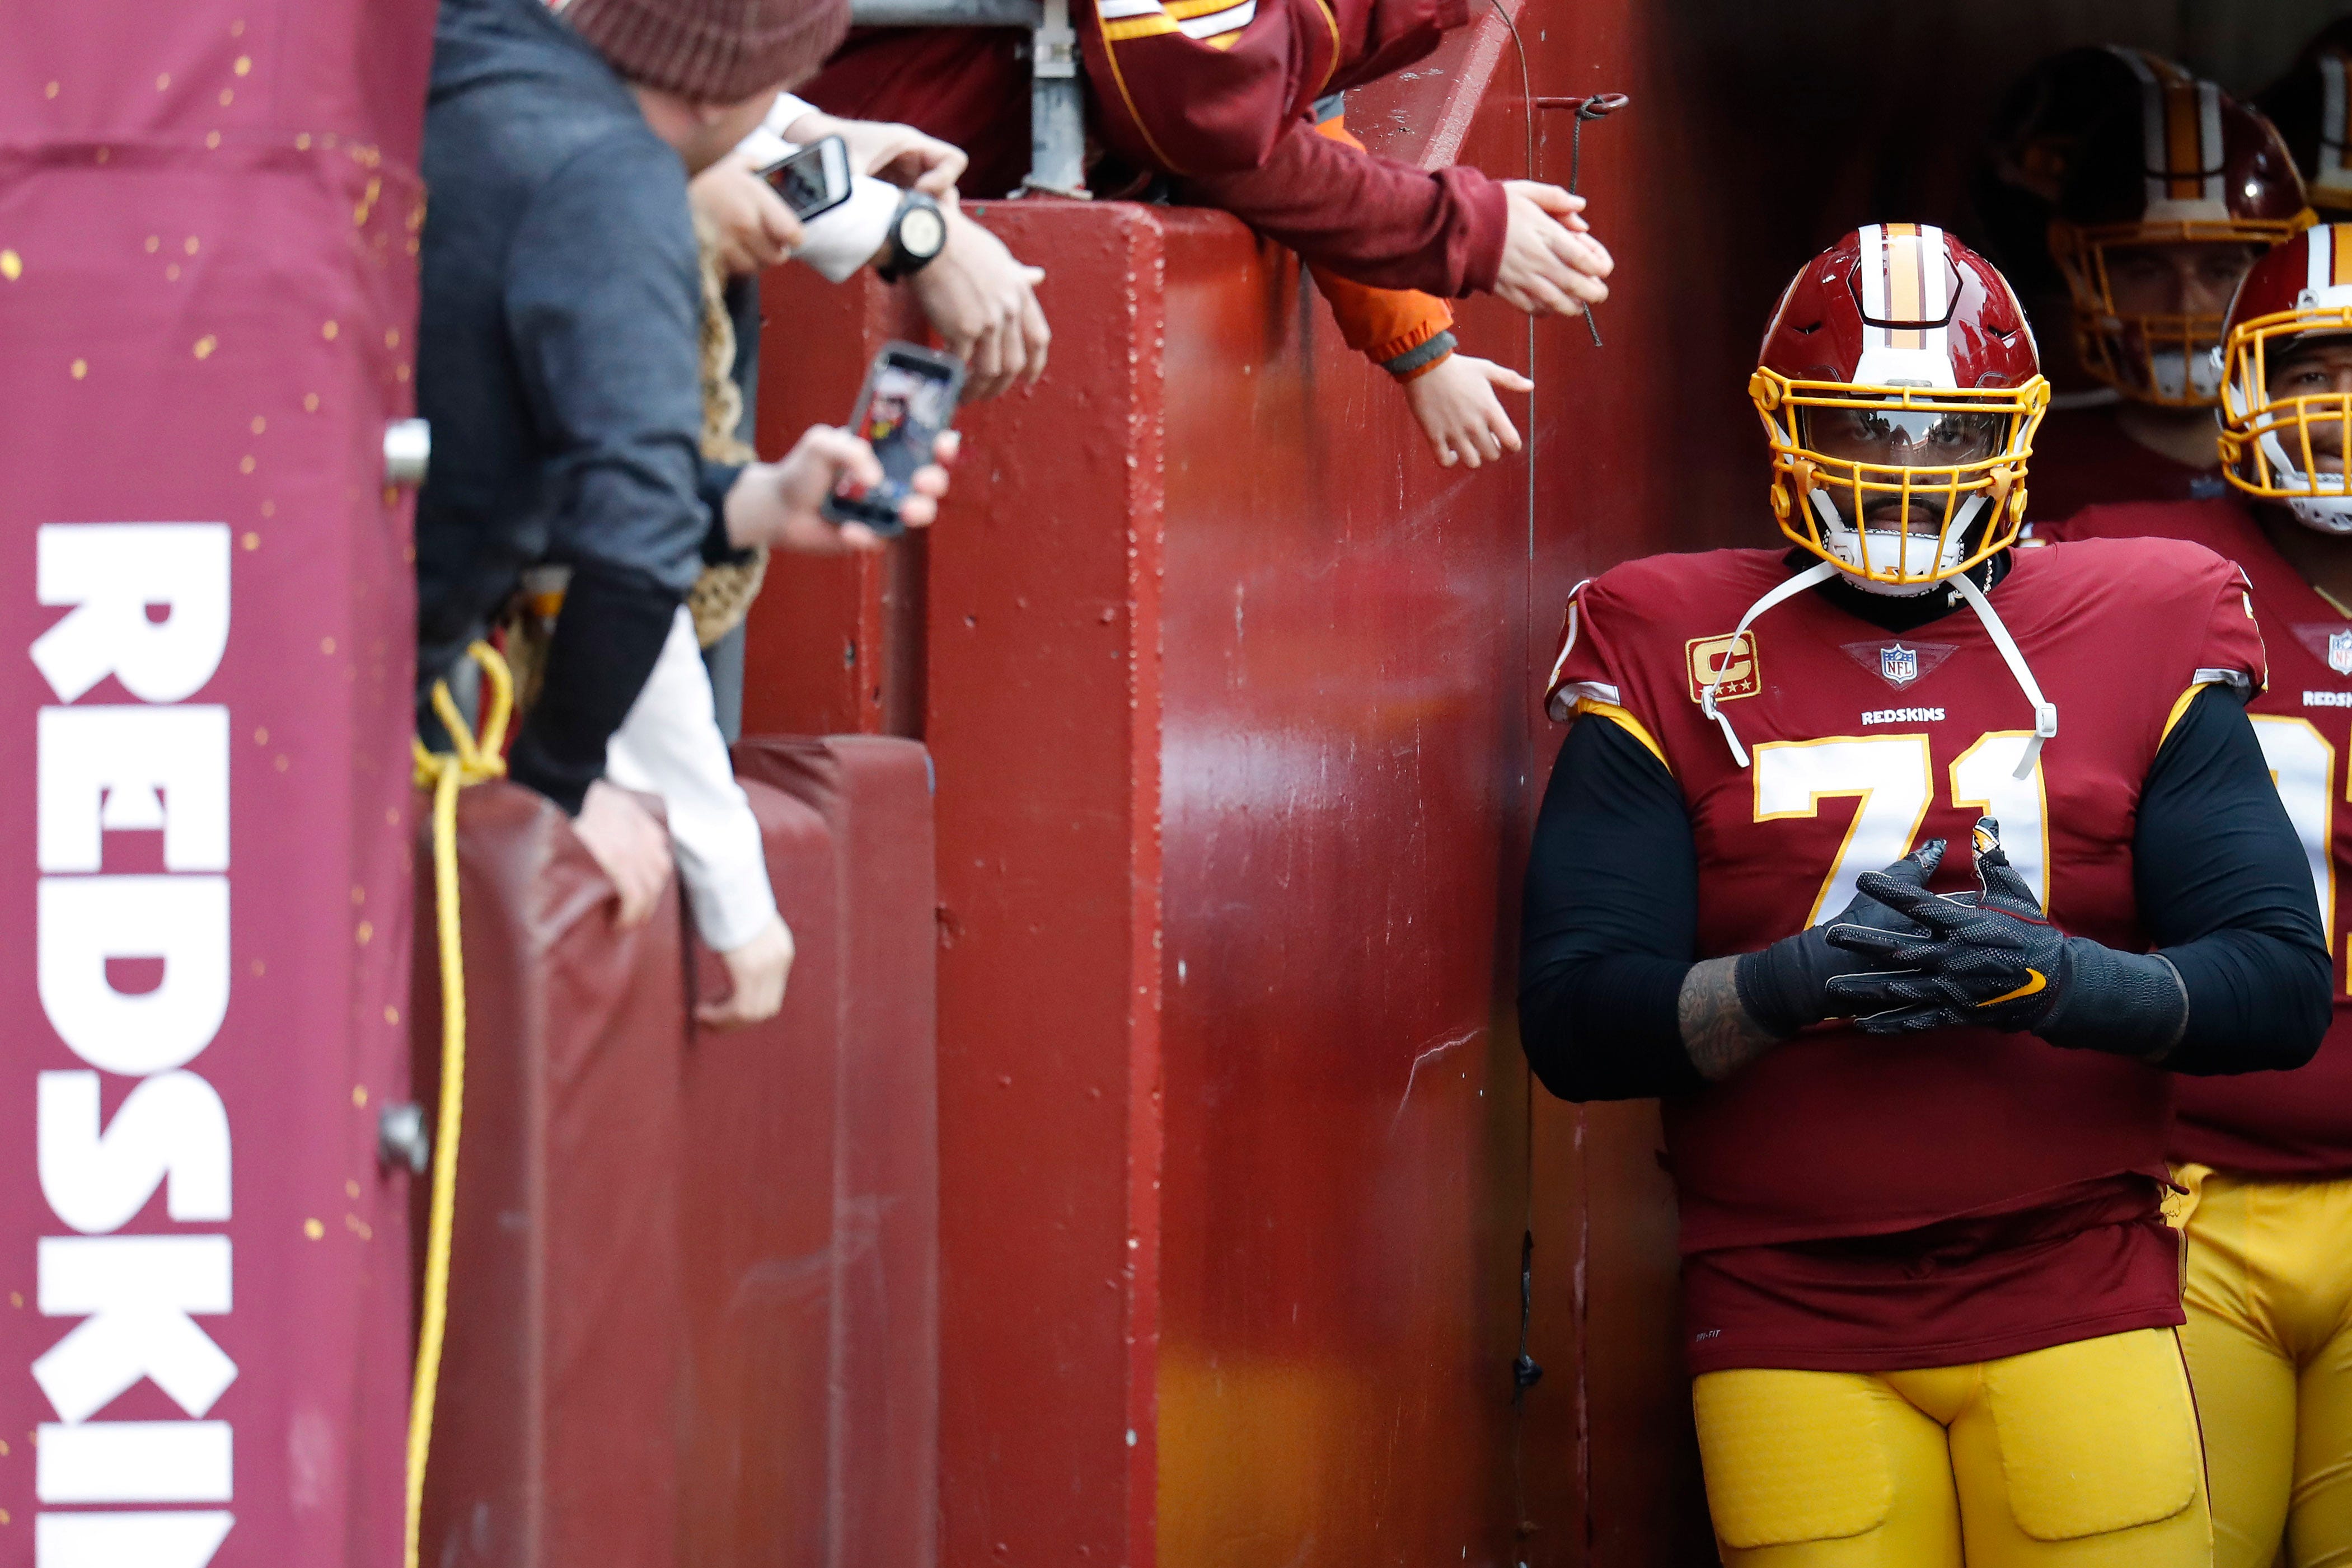 4e10c7a3-736b-4e6d-b263-04d1ff867fbe-USATSI_11921066 Trent Williams says he had cancer, alleges Redskins failed to test for it for nearly 6 years